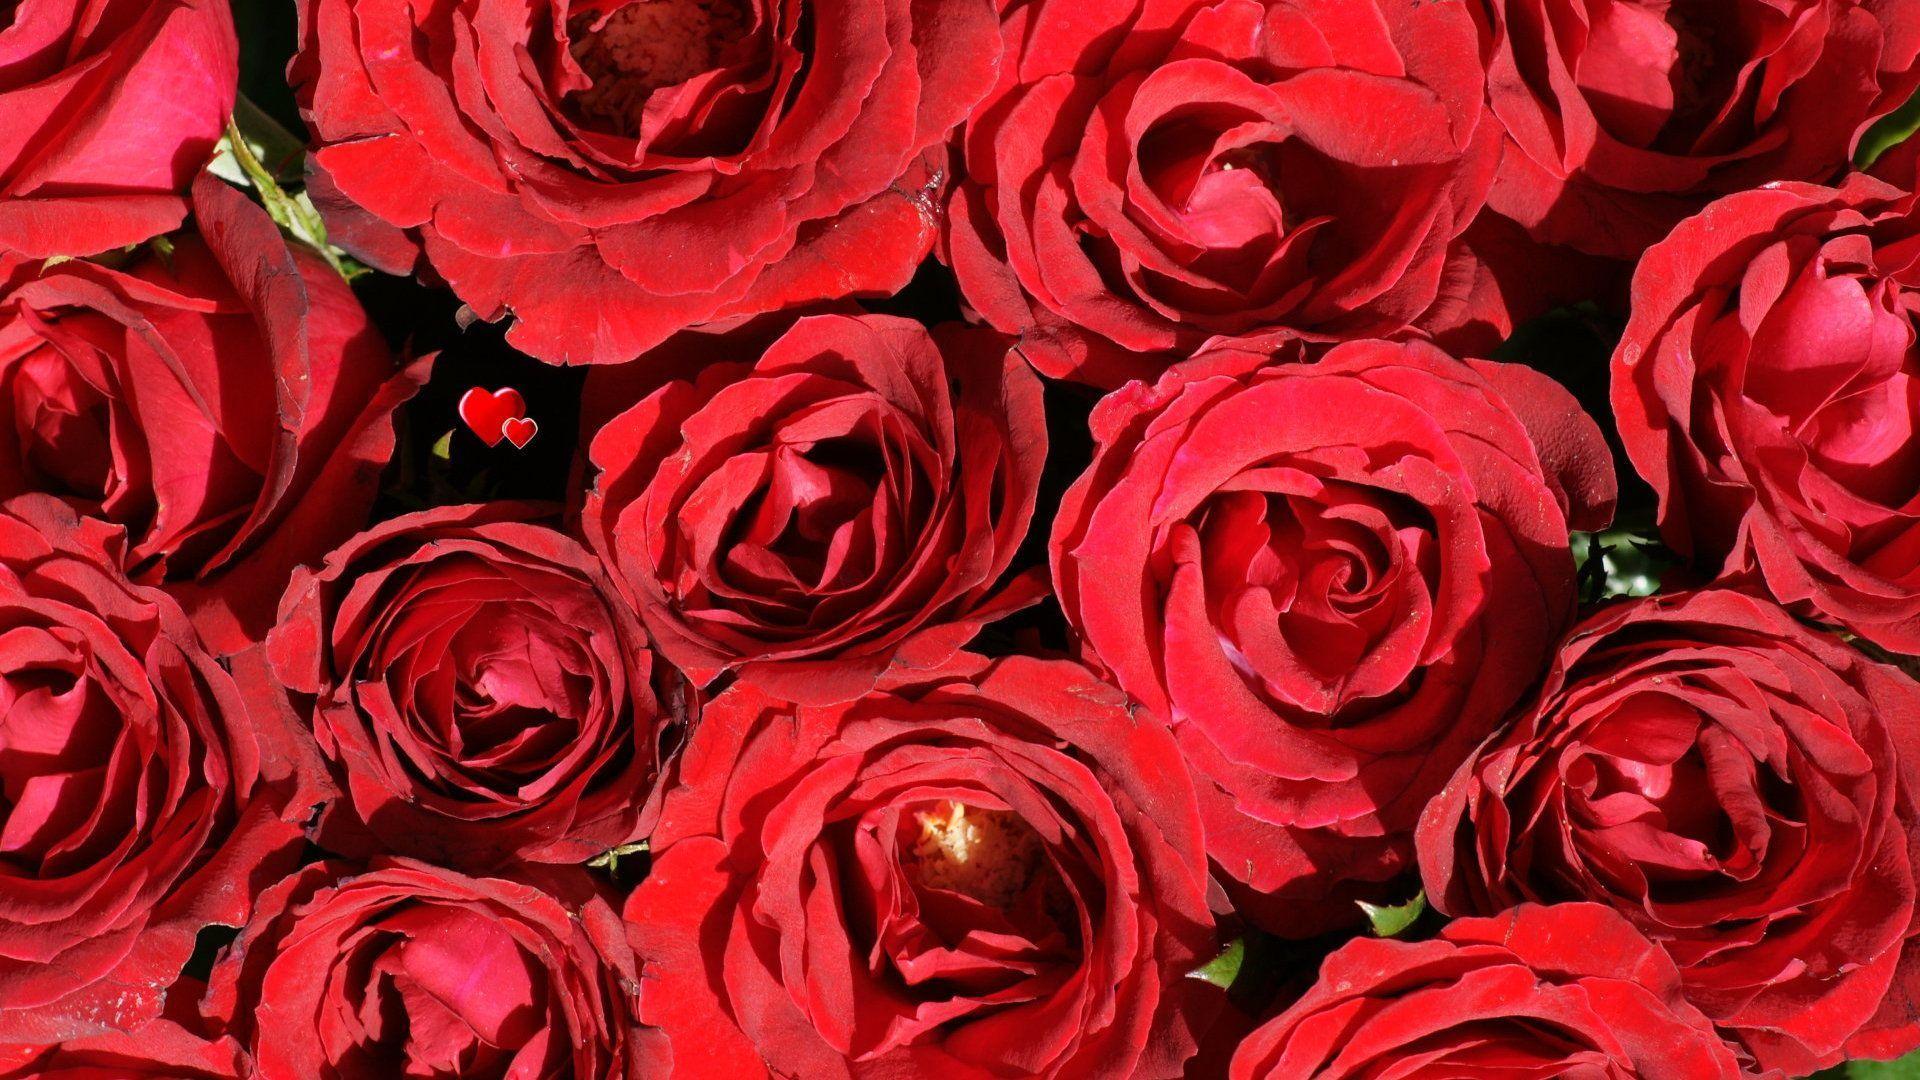 Beautiful Red Flowers Wallpaper Picture 5 HD Wallpaper. Hdimges